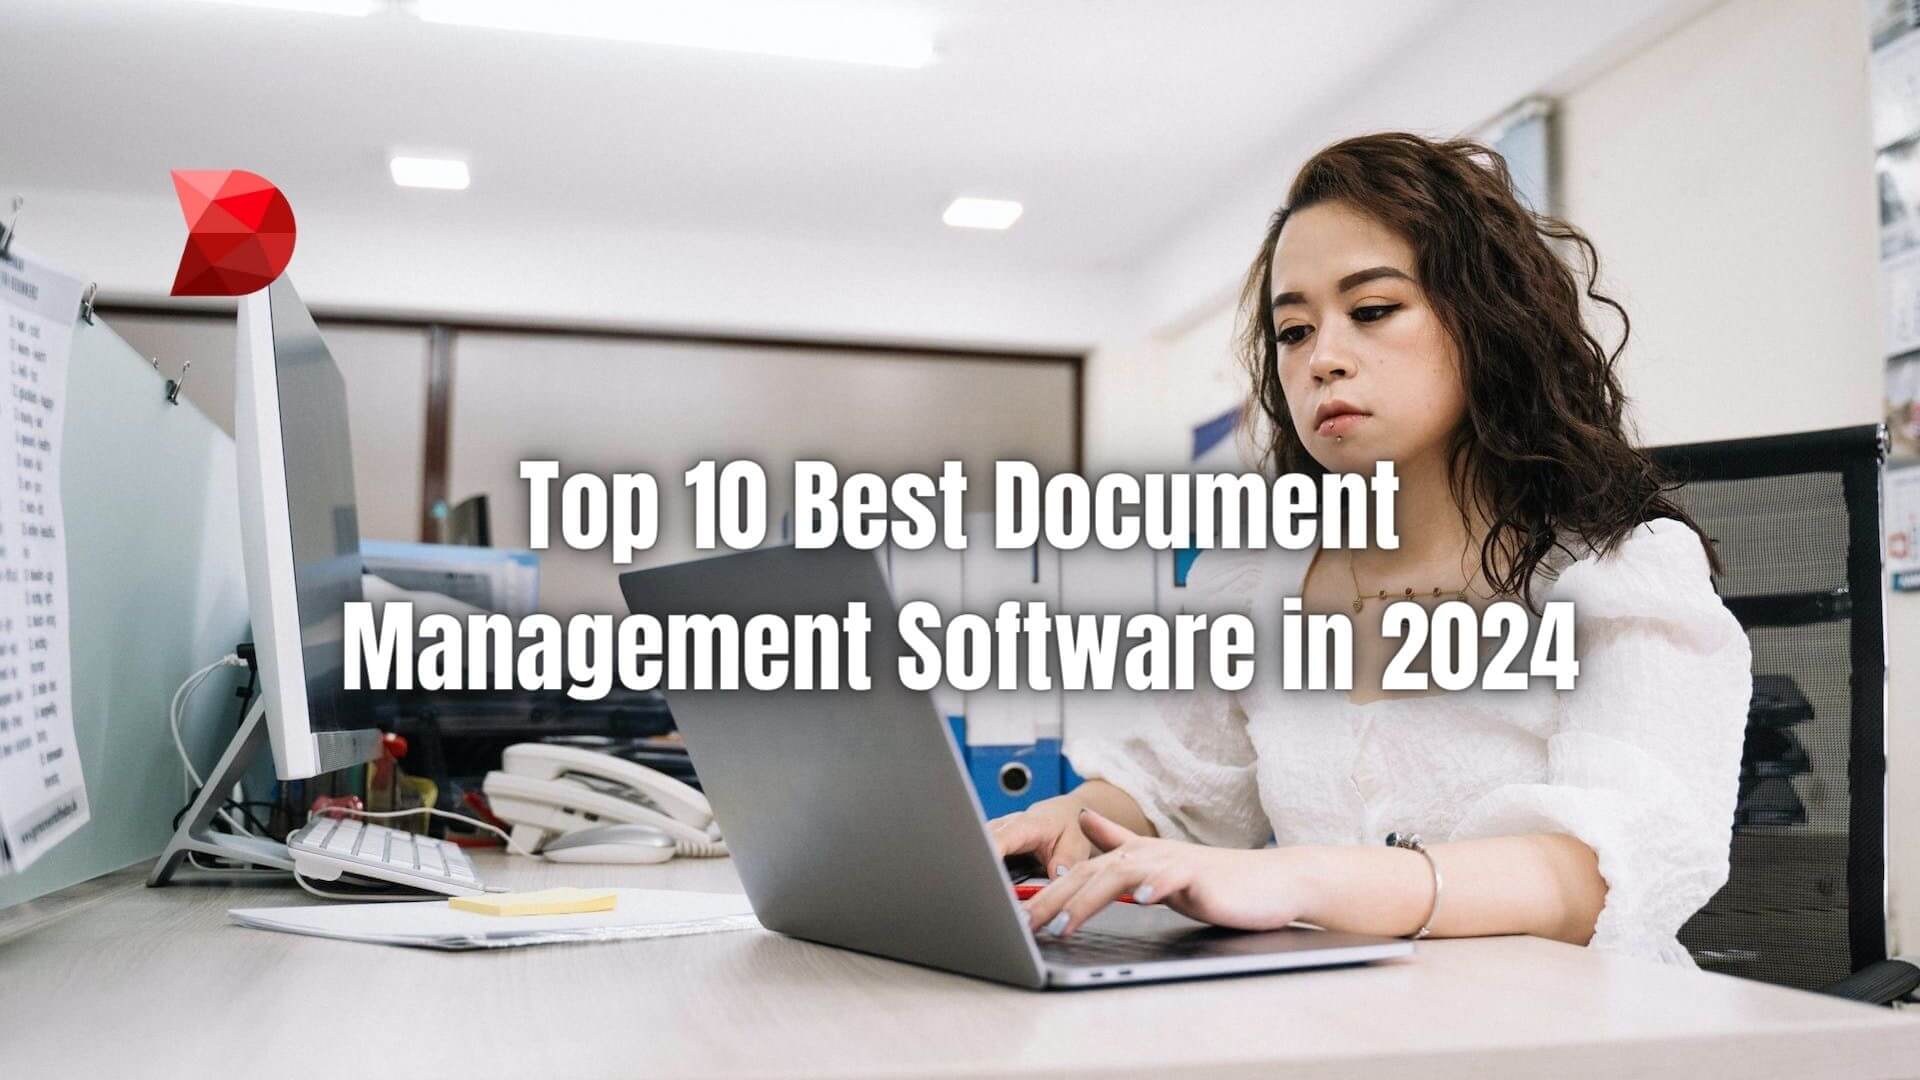 This article shares eight of the best document management software today. Read here to learn more about their features and functionality.